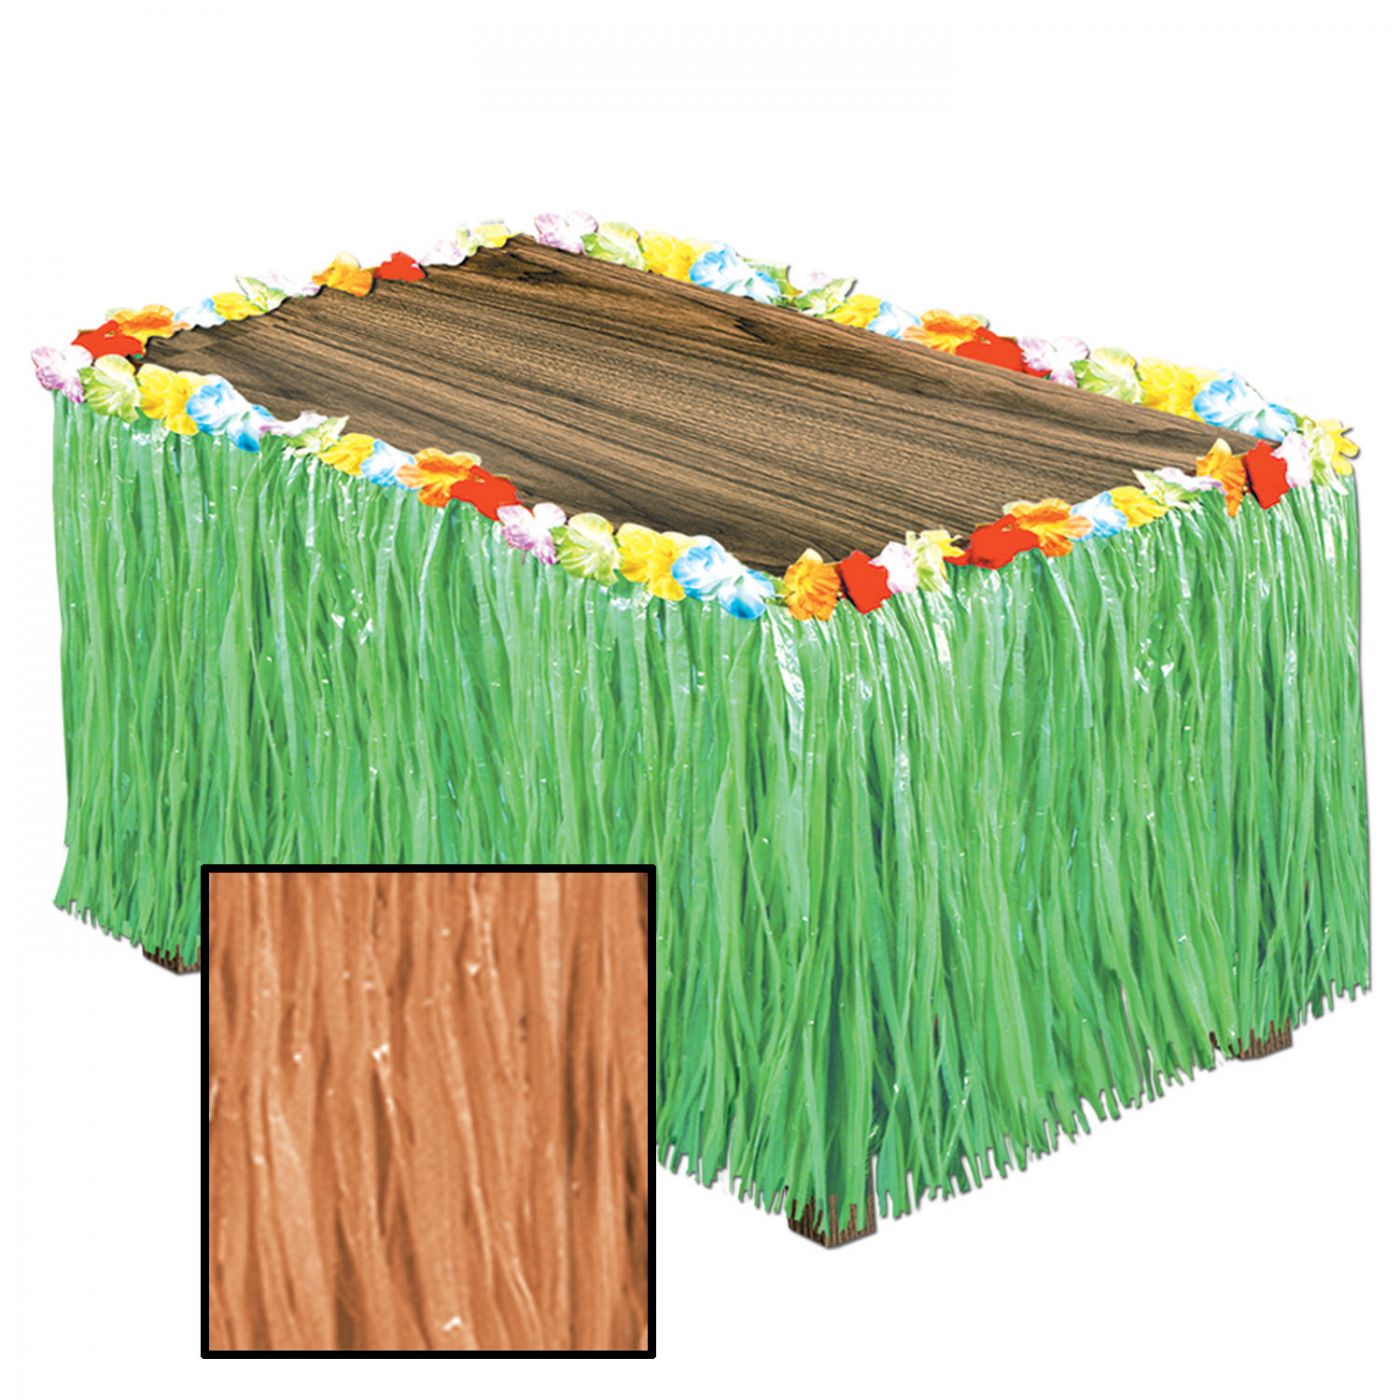 Artificial Grass Table Skirting (6) image